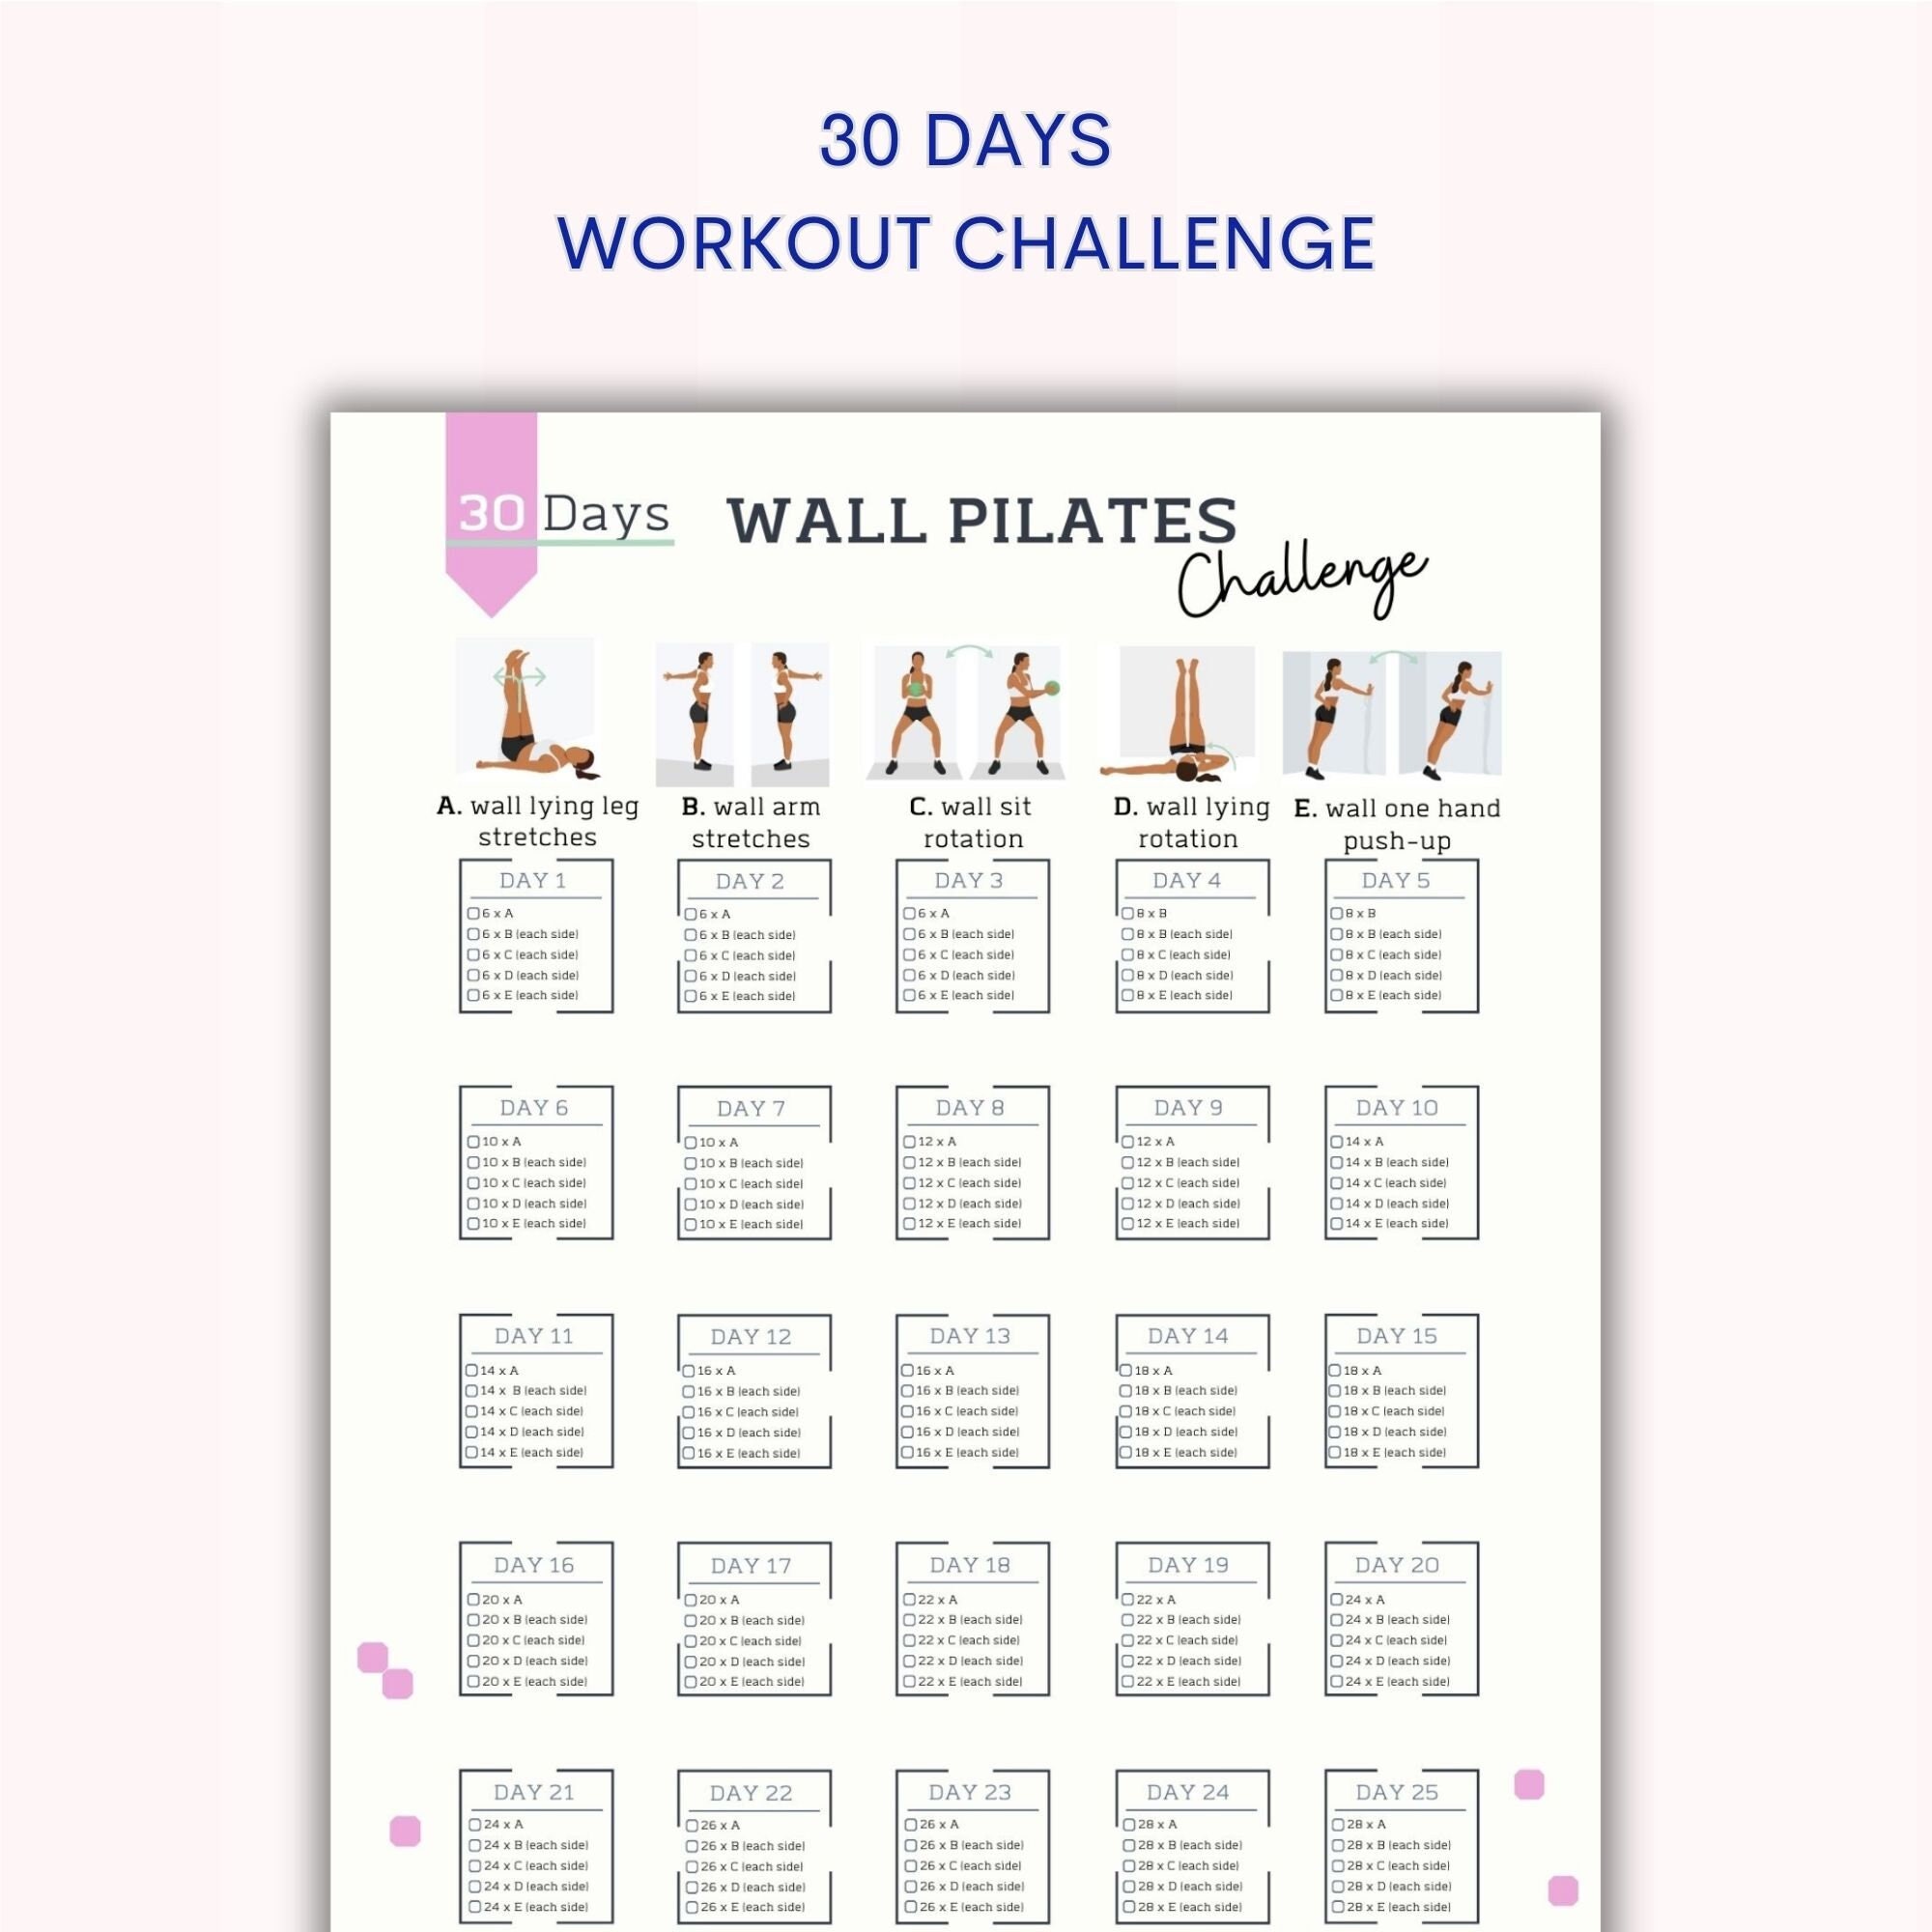 30 Day Wall Pilates Challenge Wall Pilates Workout Digital Quick